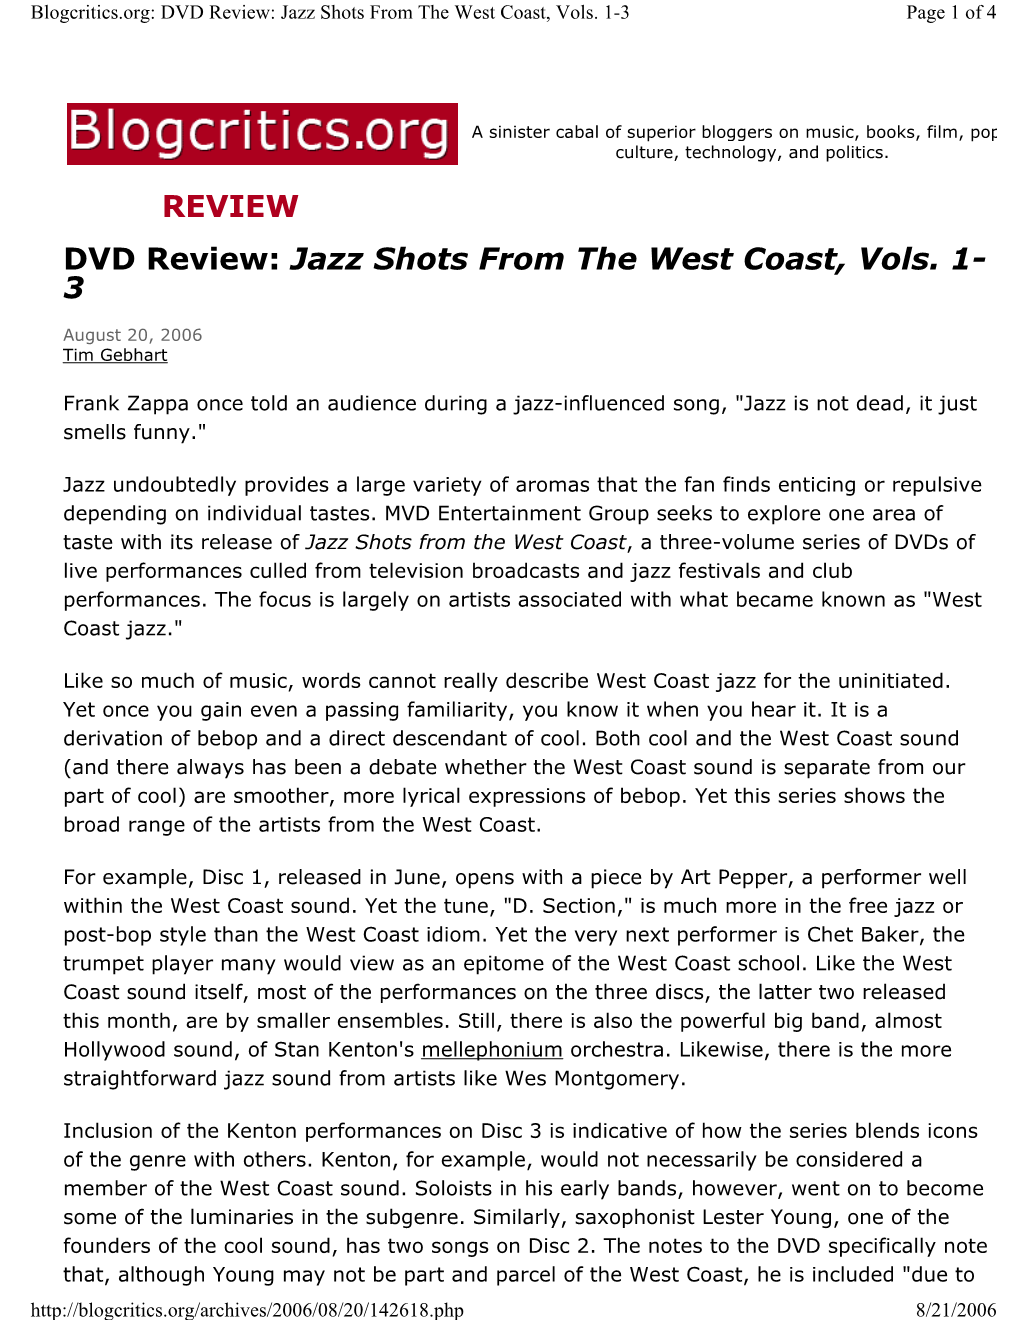 DVD Review: Jazz Shots from the West Coast, Vols. 1- 3 REVIEW